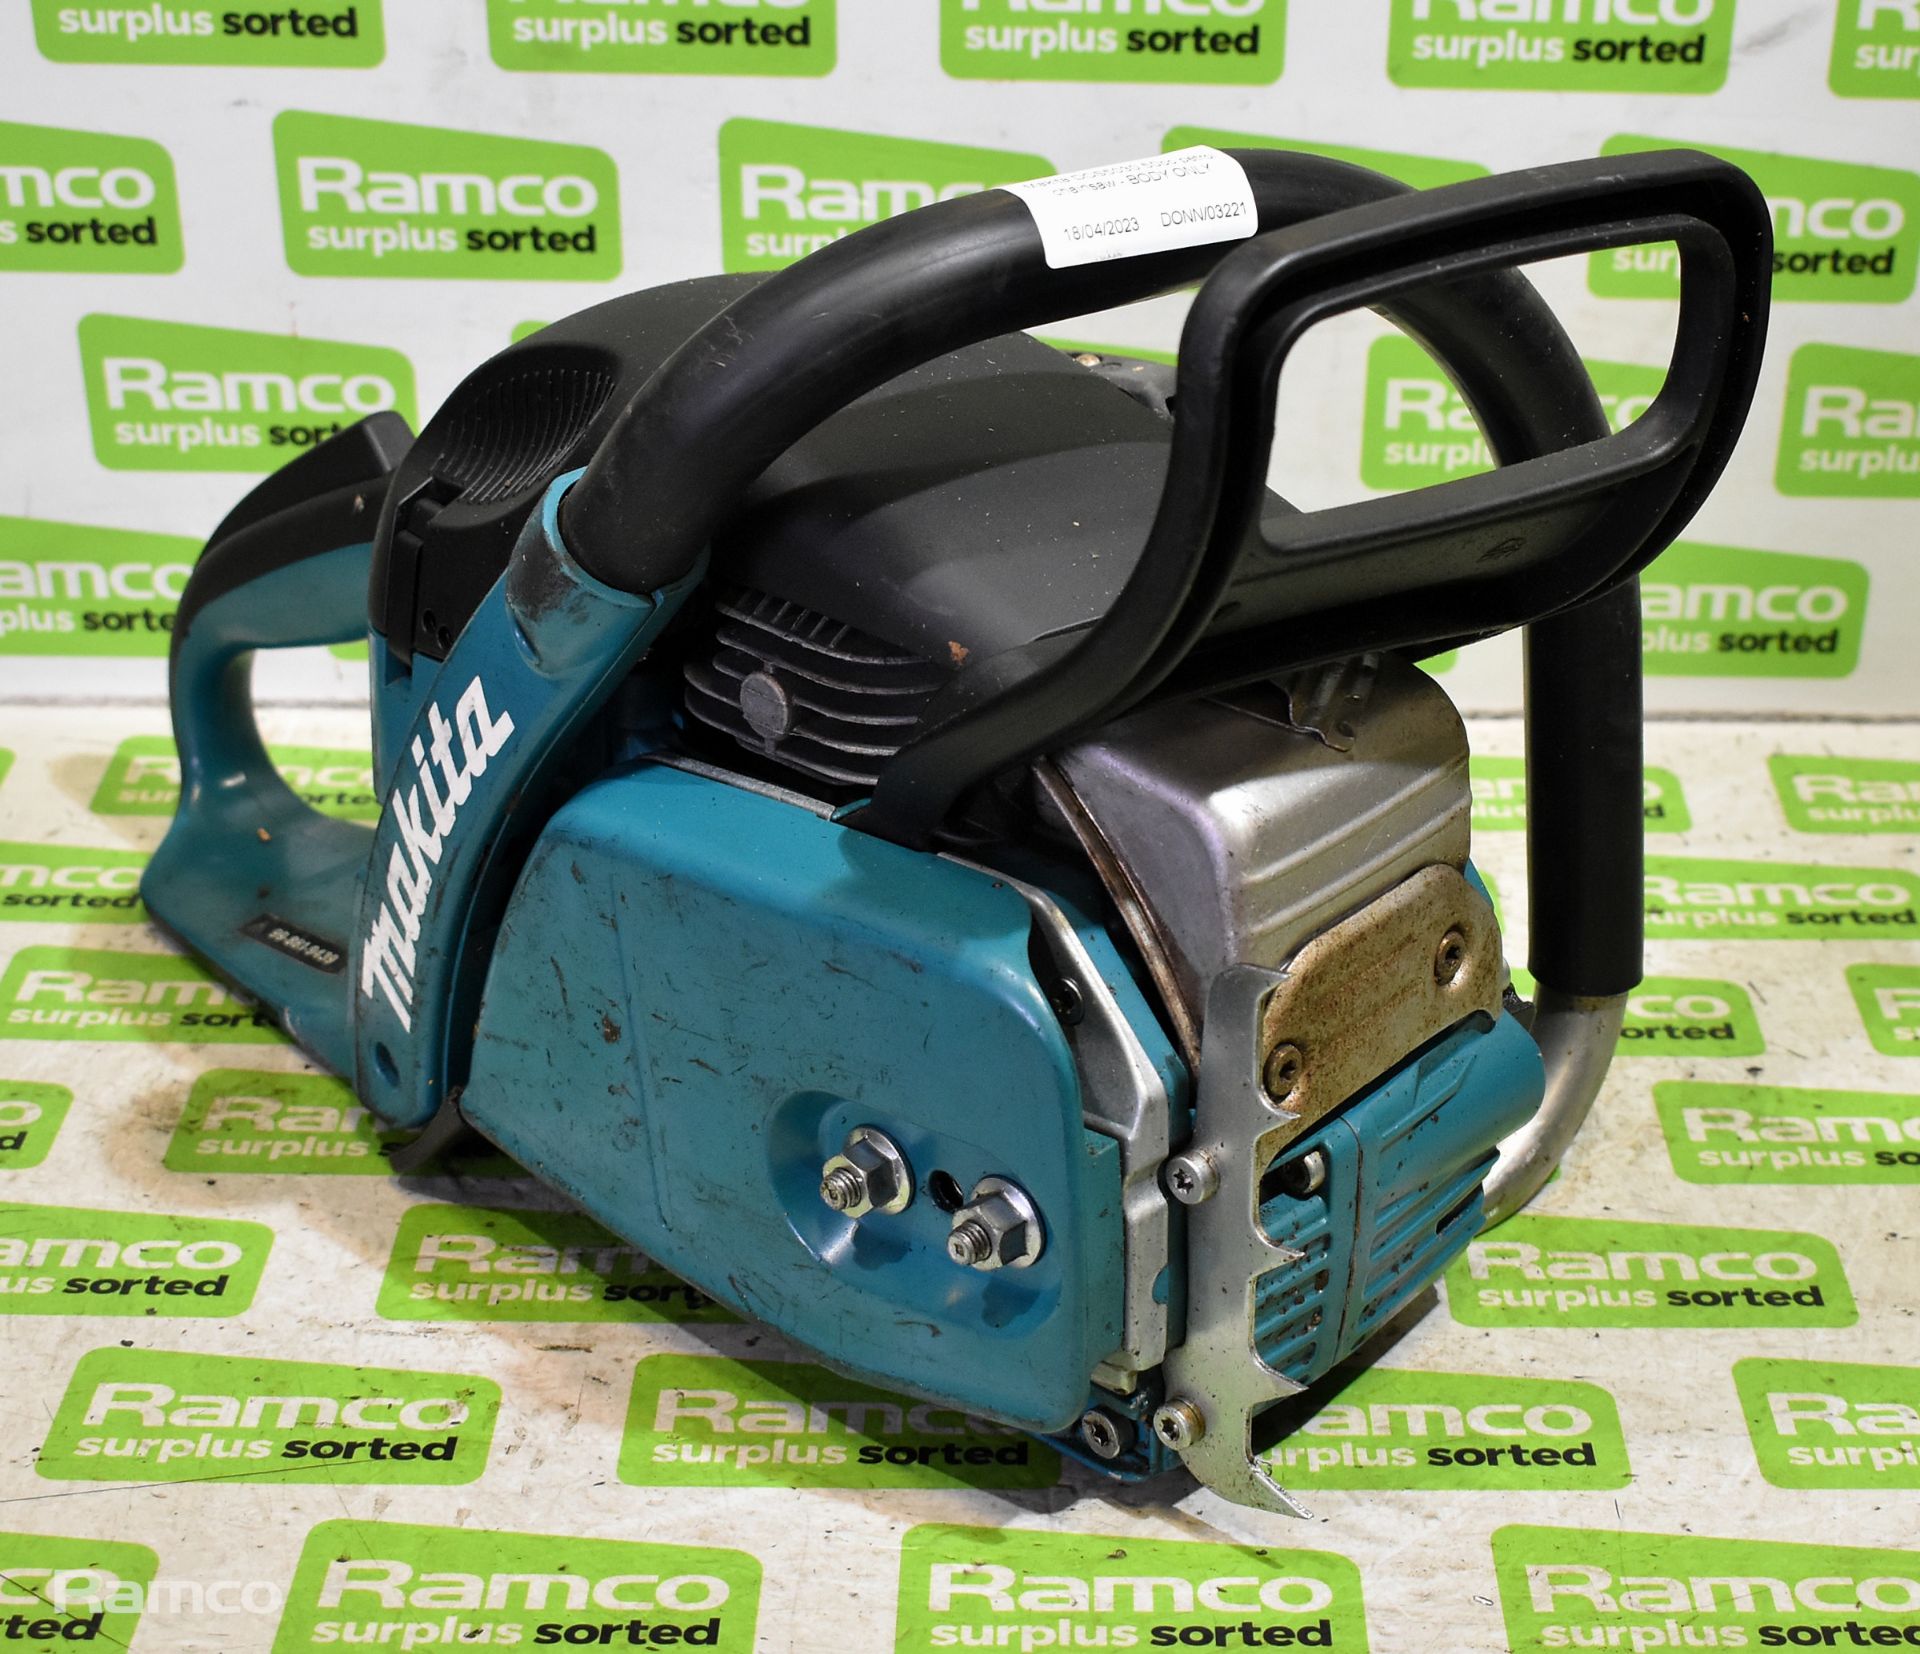 4x Makita DCS5030 50cc petrol chainsaws - BODIES ONLY - AS SPARES OR REPAIRS - Image 13 of 21